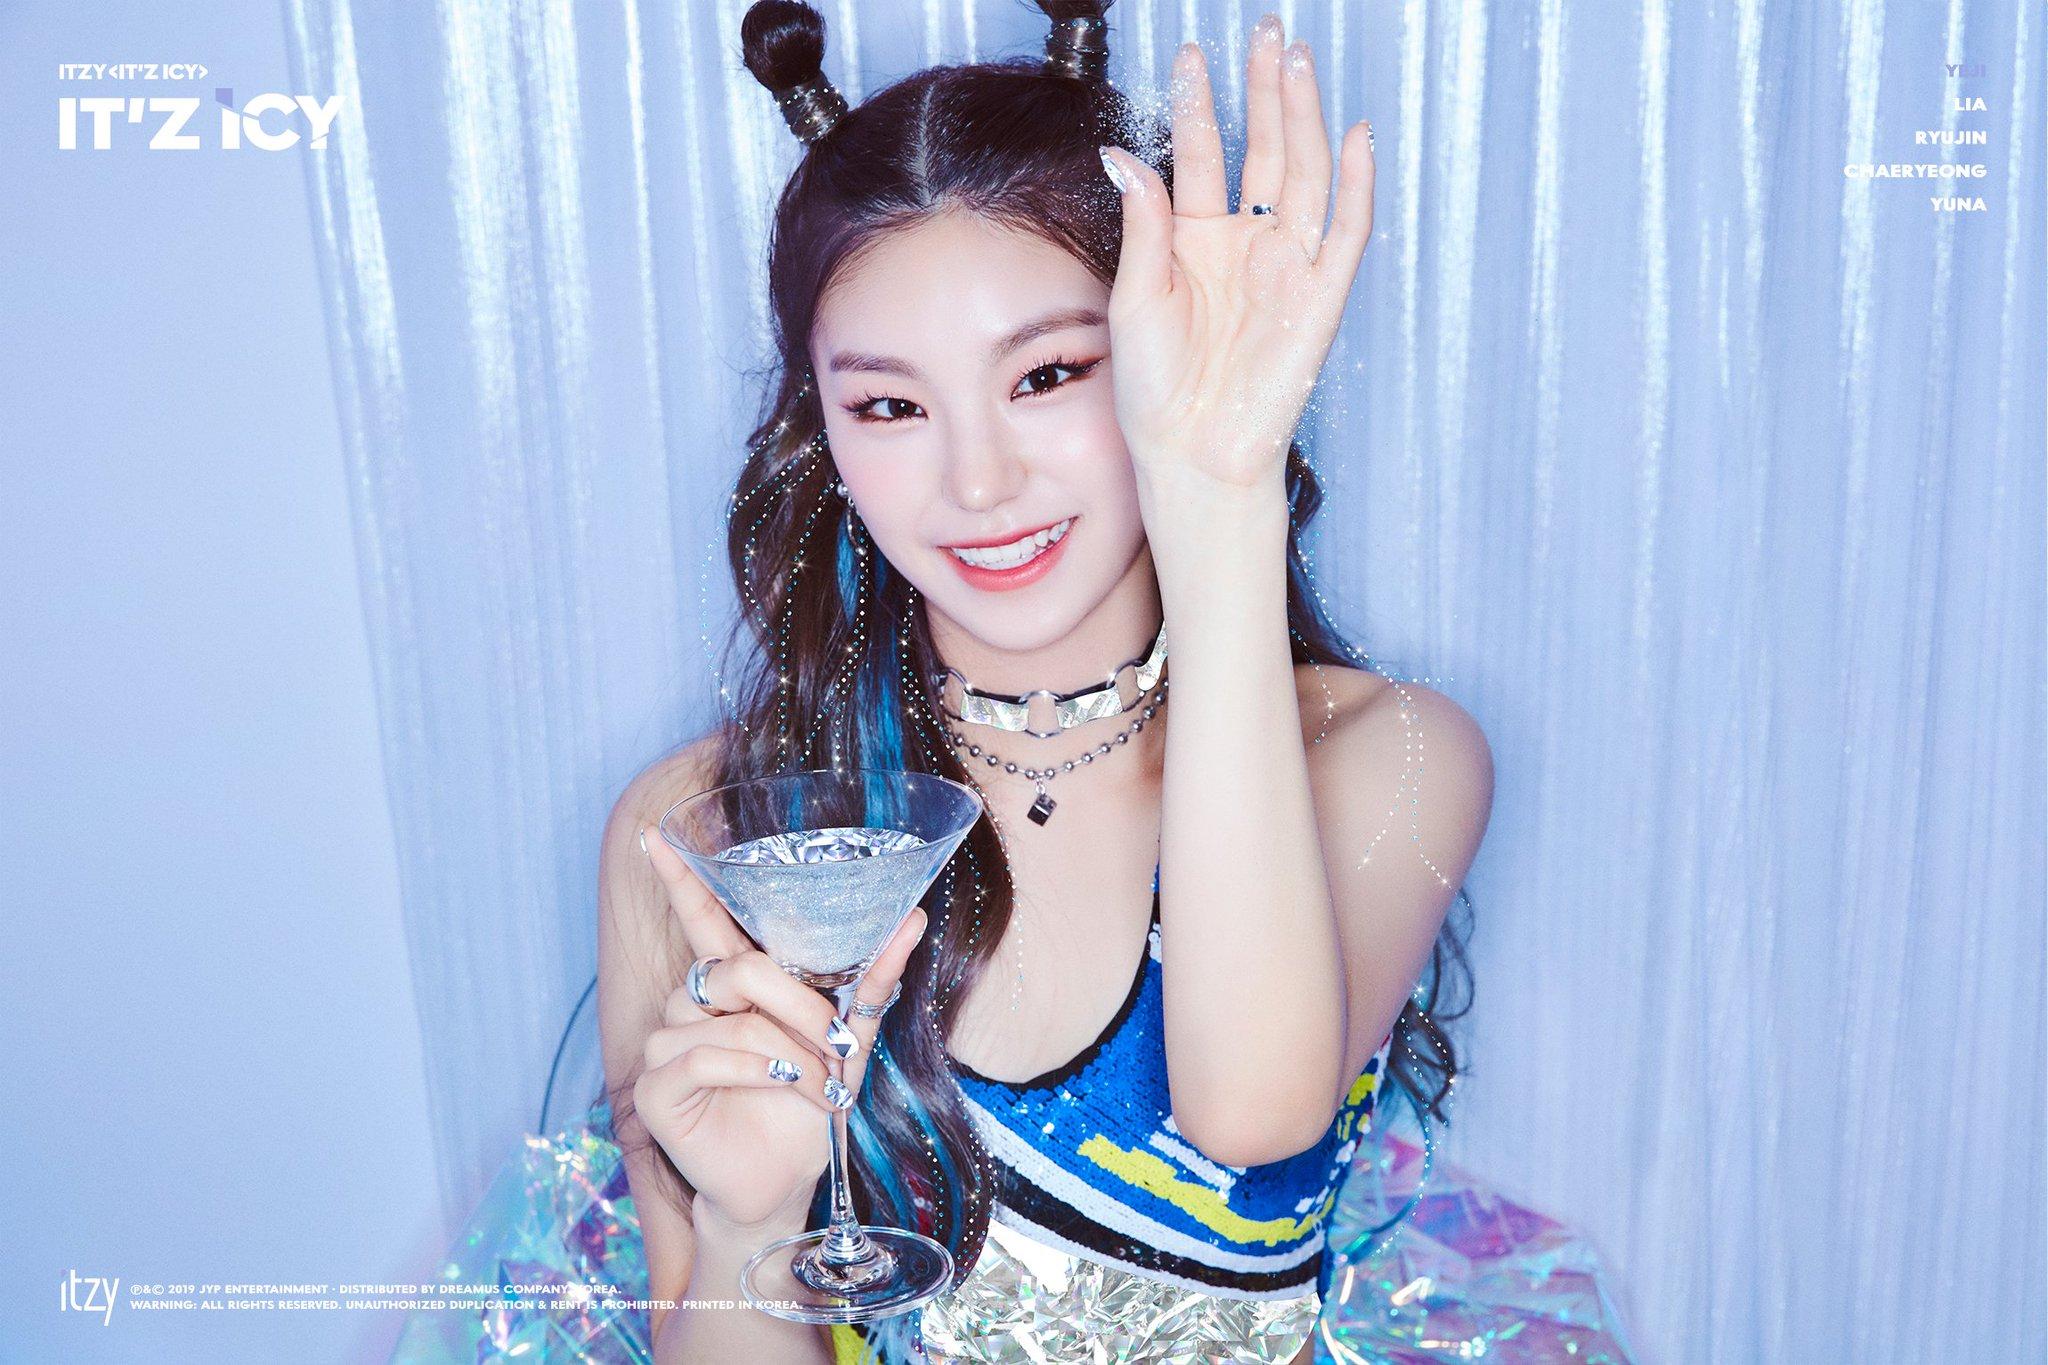 ITZY unveils teaser image for 'IT'z ICY' featuring